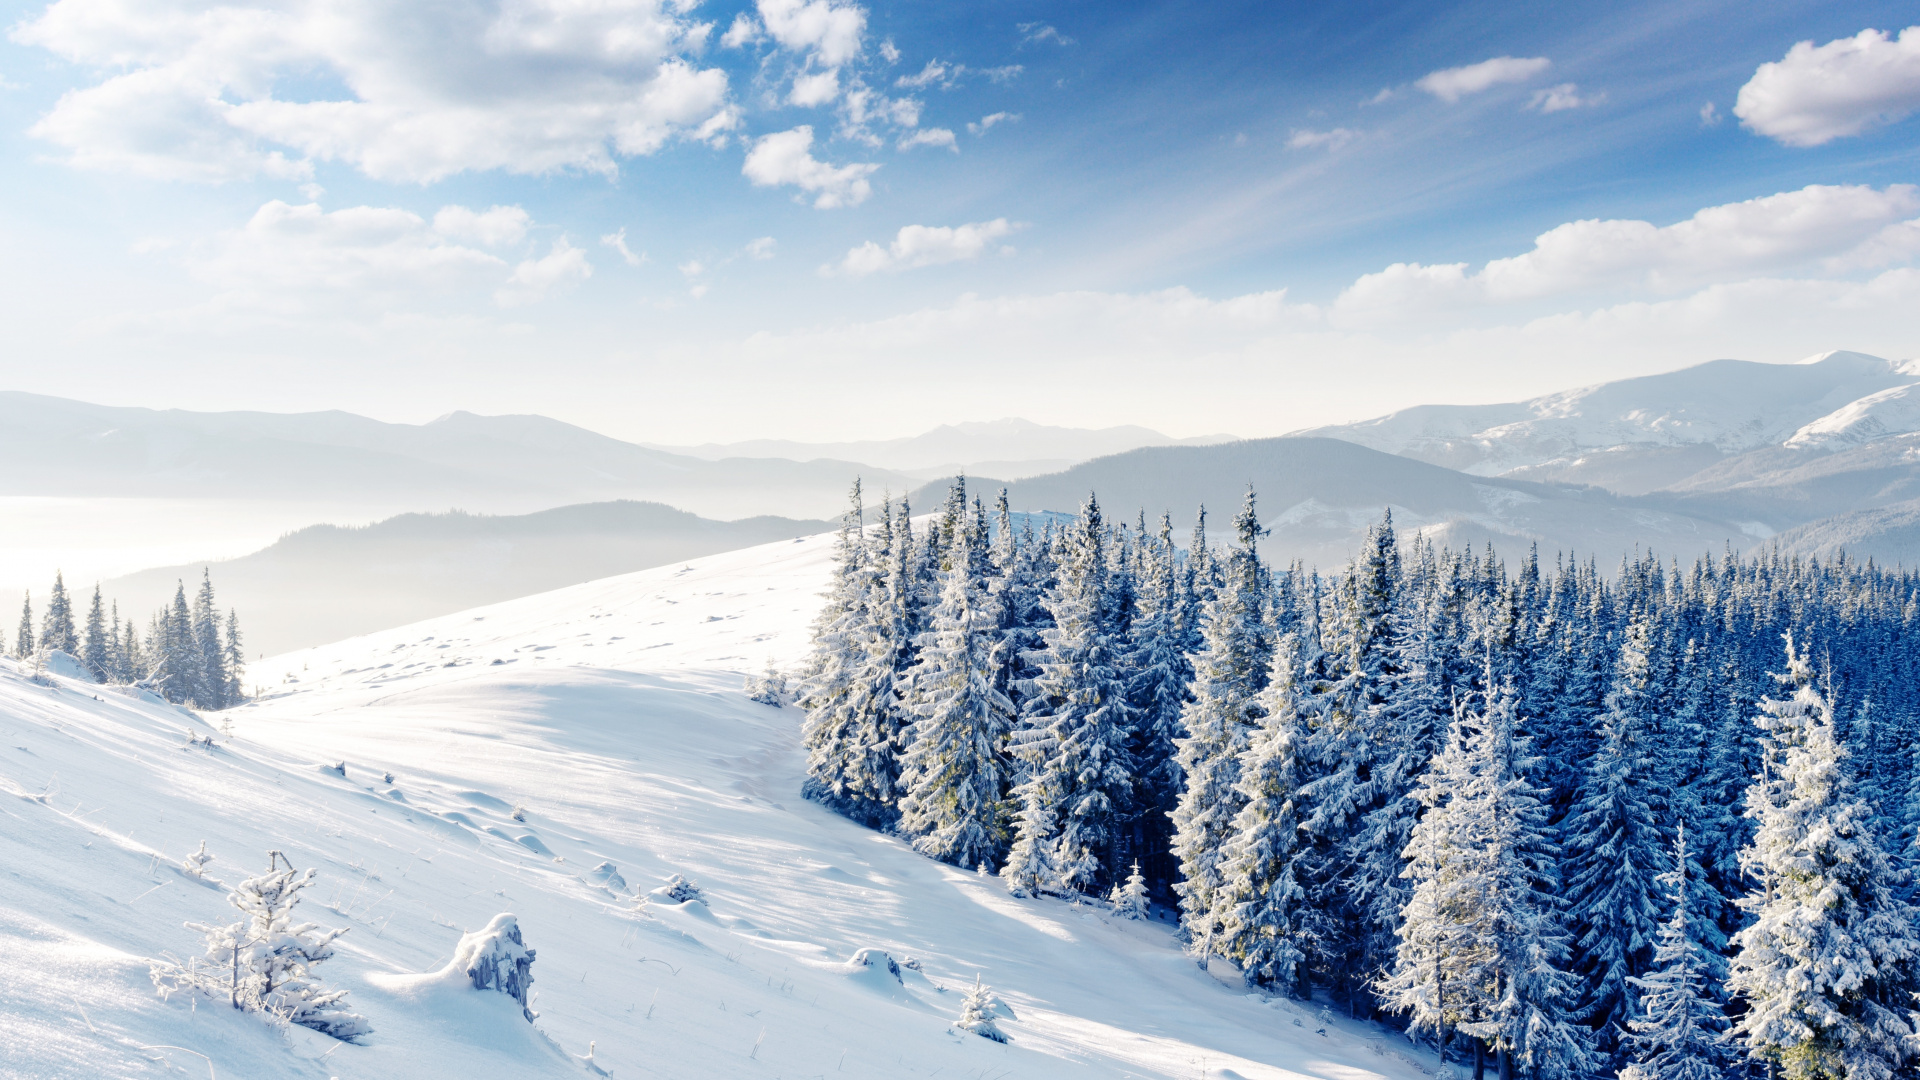 Snow Covered Pine Trees on Snow Covered Ground Under Blue Sky During Daytime. Wallpaper in 1920x1080 Resolution